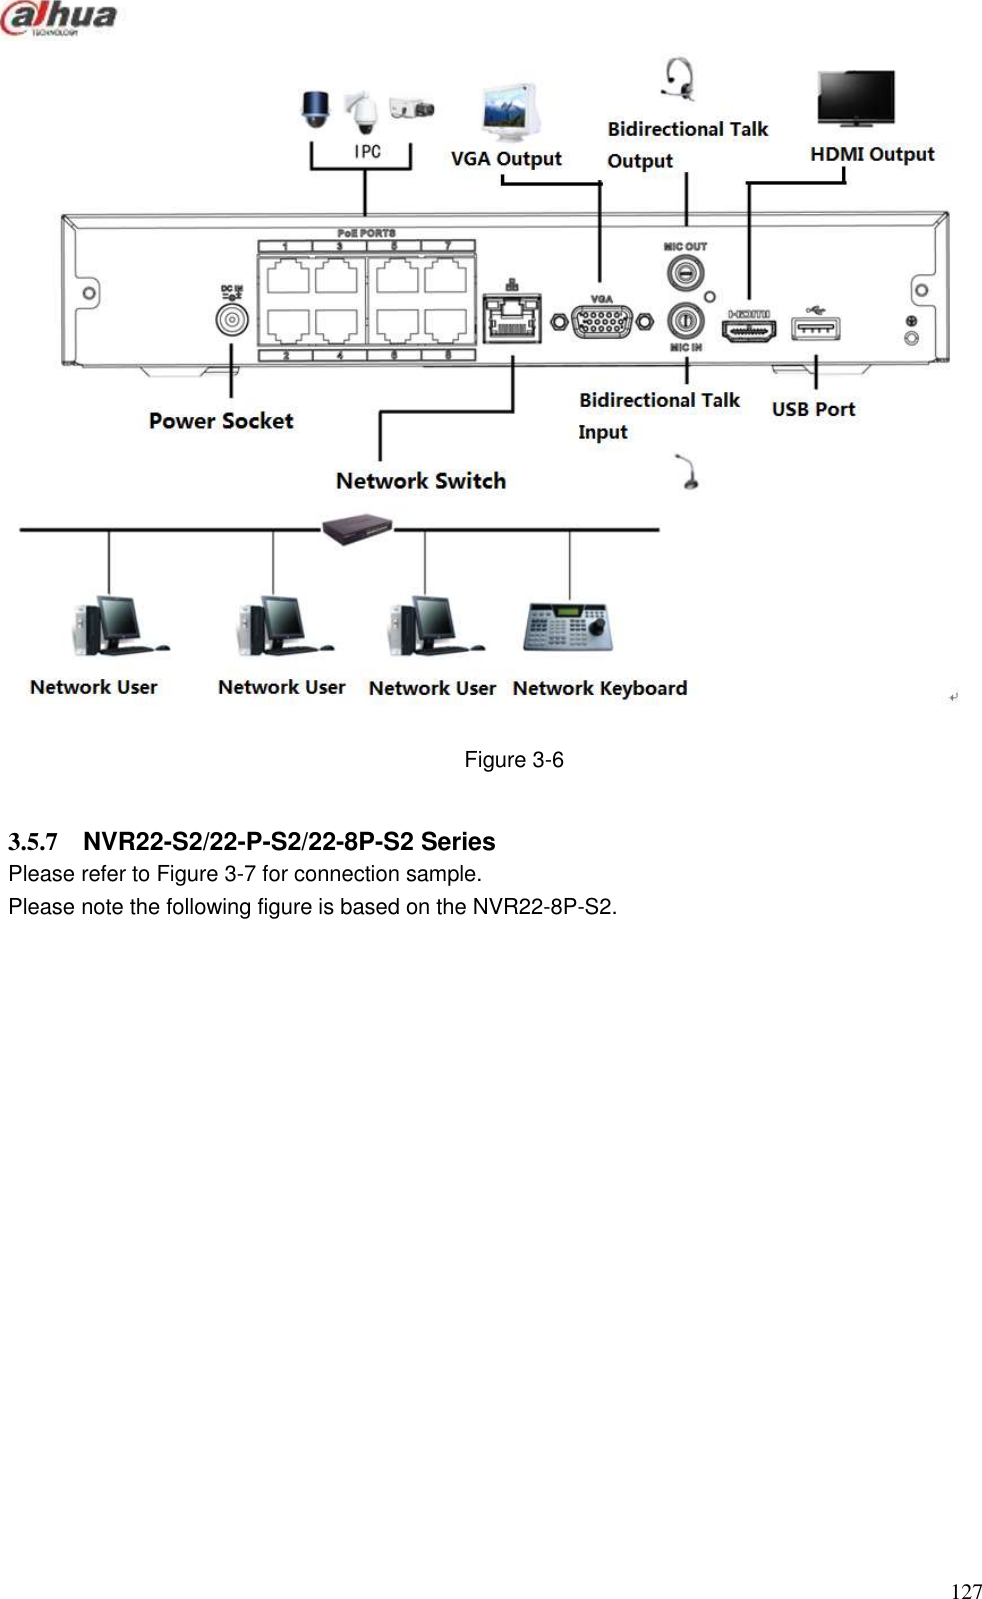  127   Figure 3-6  3.5.7  NVR22-S2/22-P-S2/22-8P-S2 Series   Please refer to Figure 3-7 for connection sample.   Please note the following figure is based on the NVR22-8P-S2.    